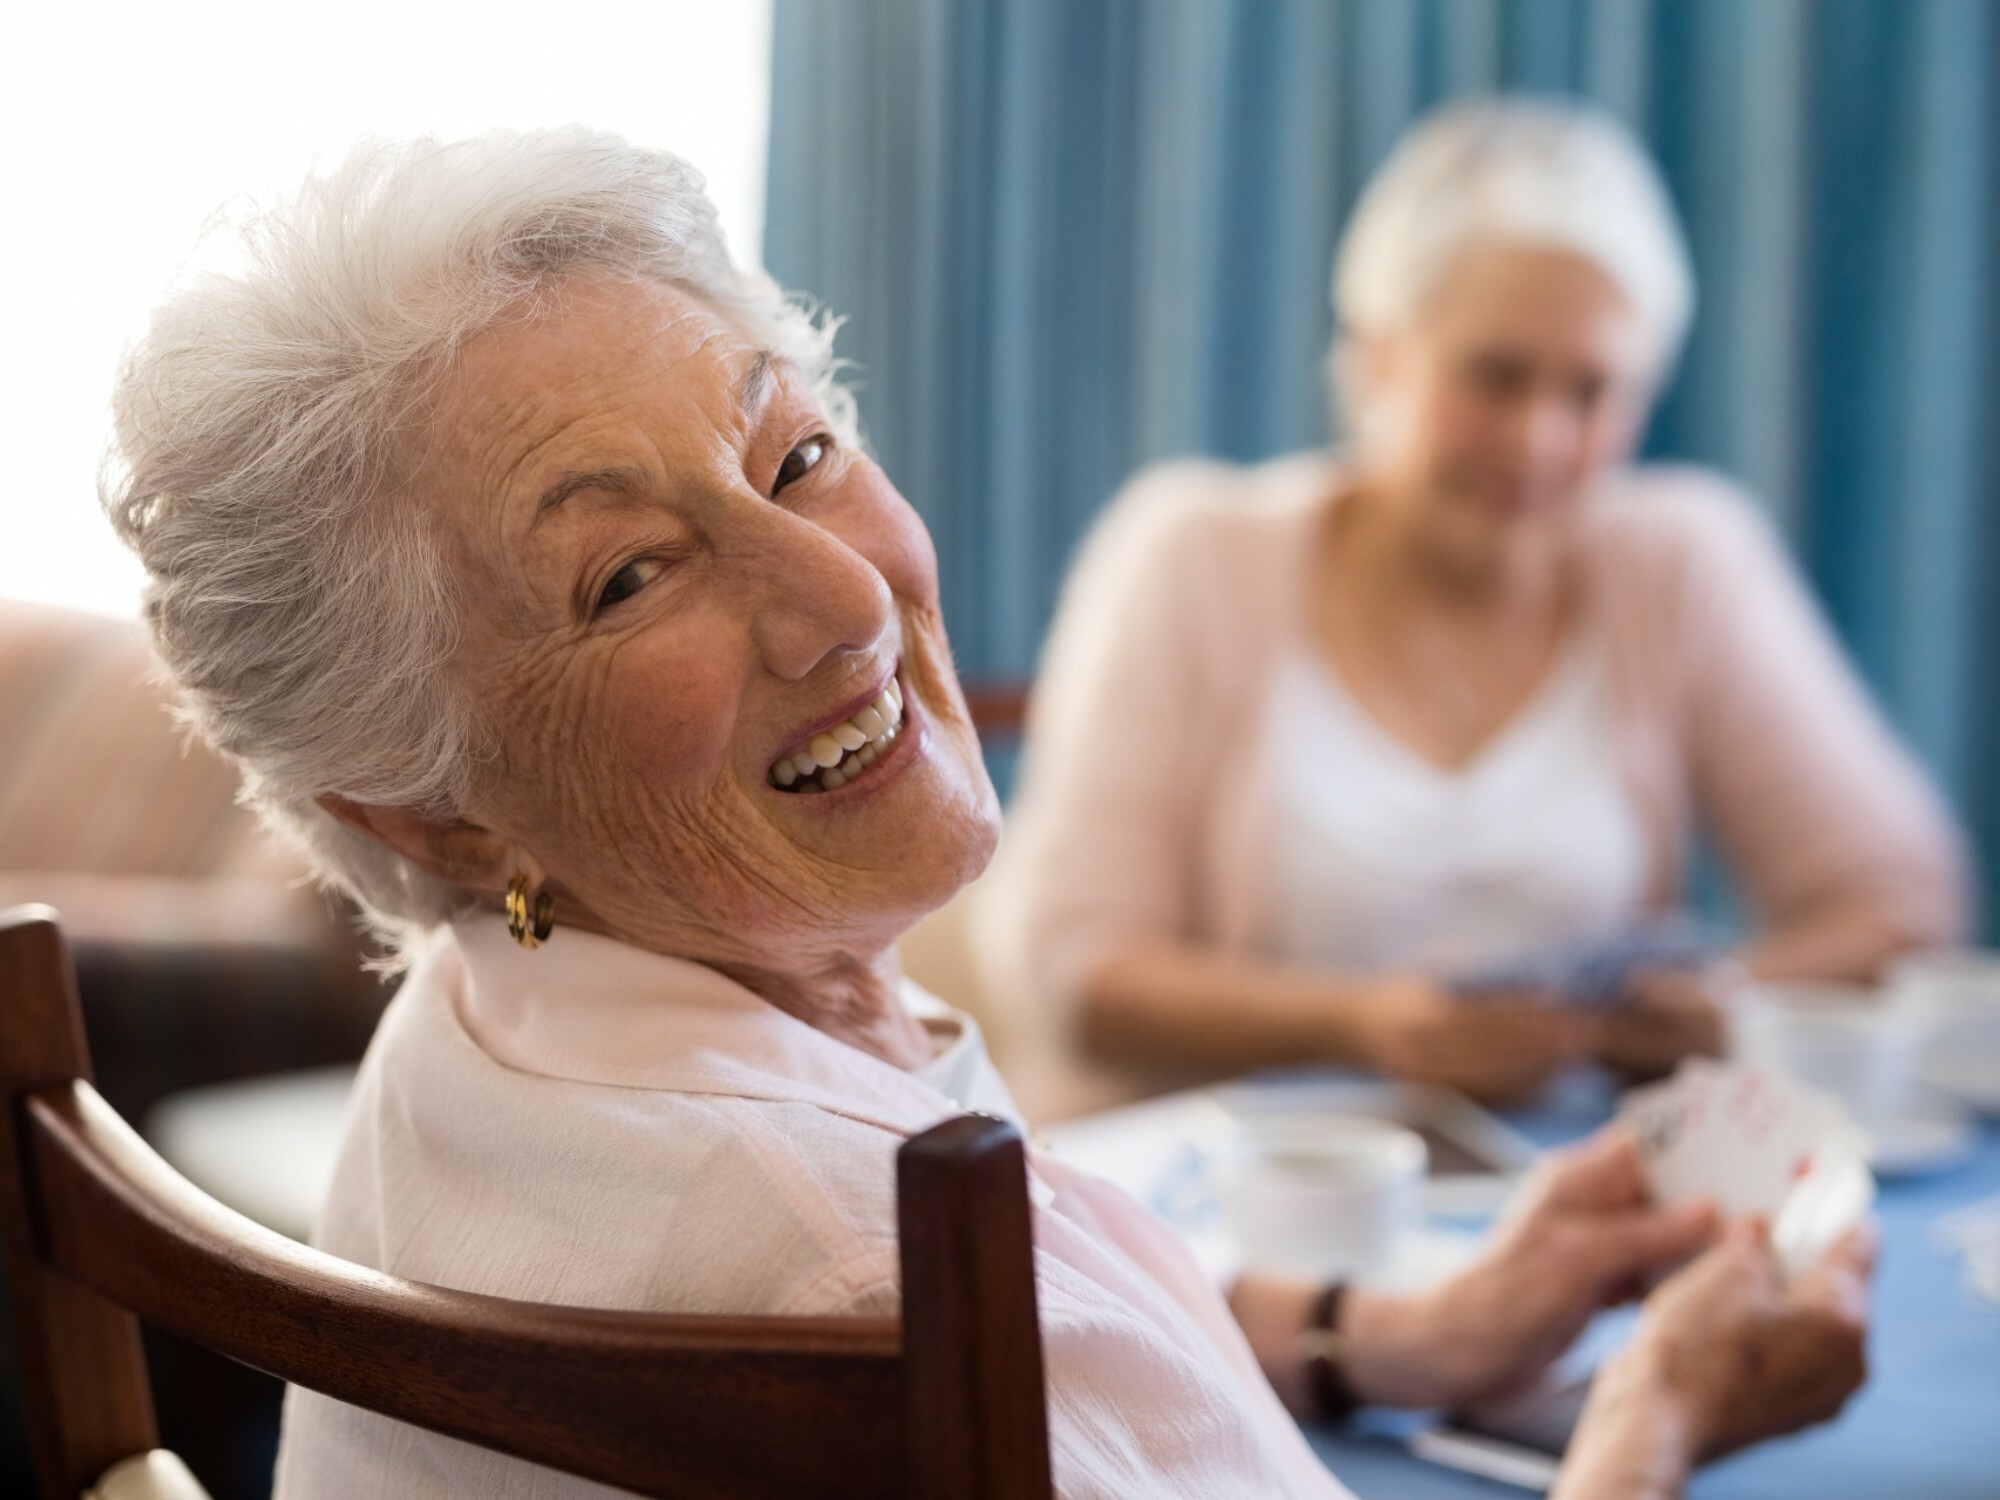 Older lady looks over her shoulder and smiles as she plays a card game with friends at home.